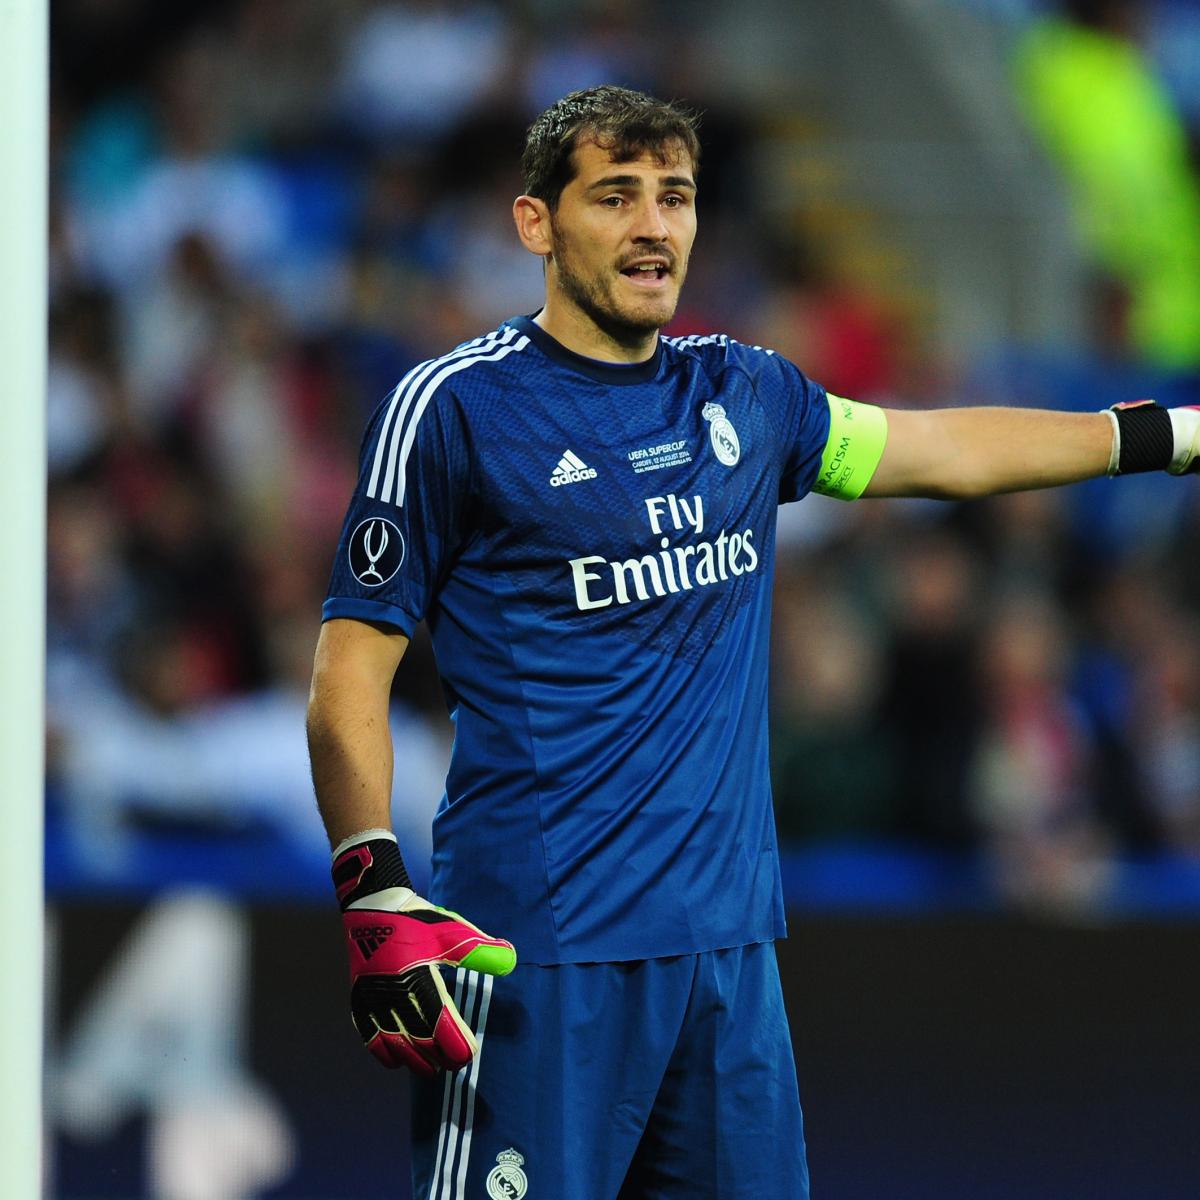 Yahoo! S.E.A Exclusive with Iker Casillas